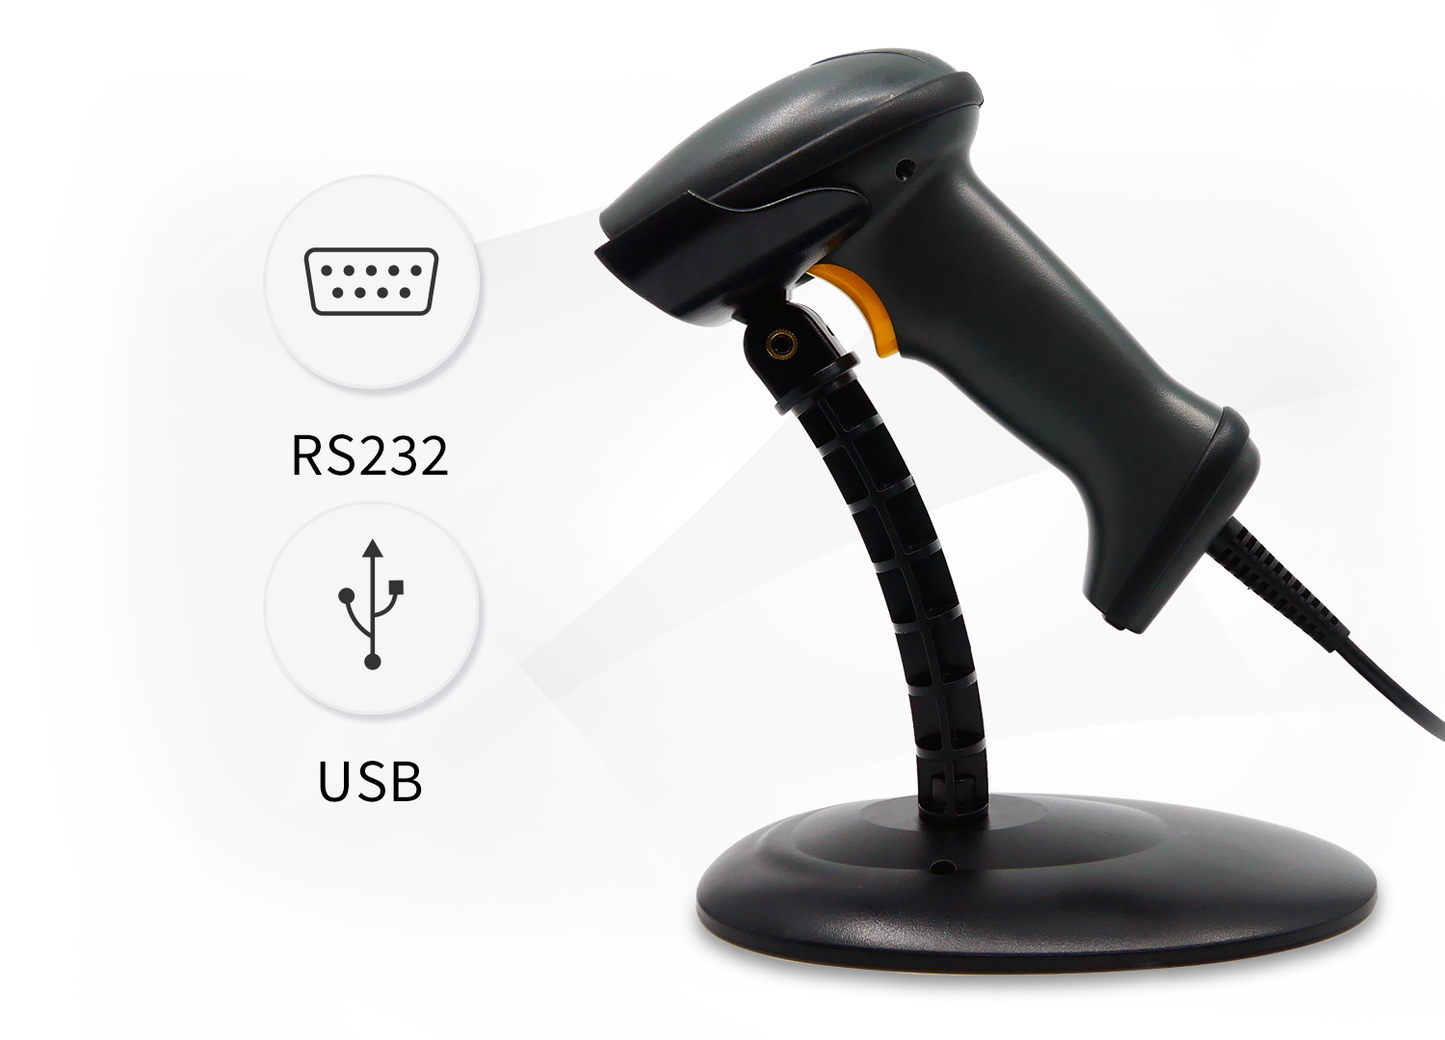 USB Bar Code Reader with stand